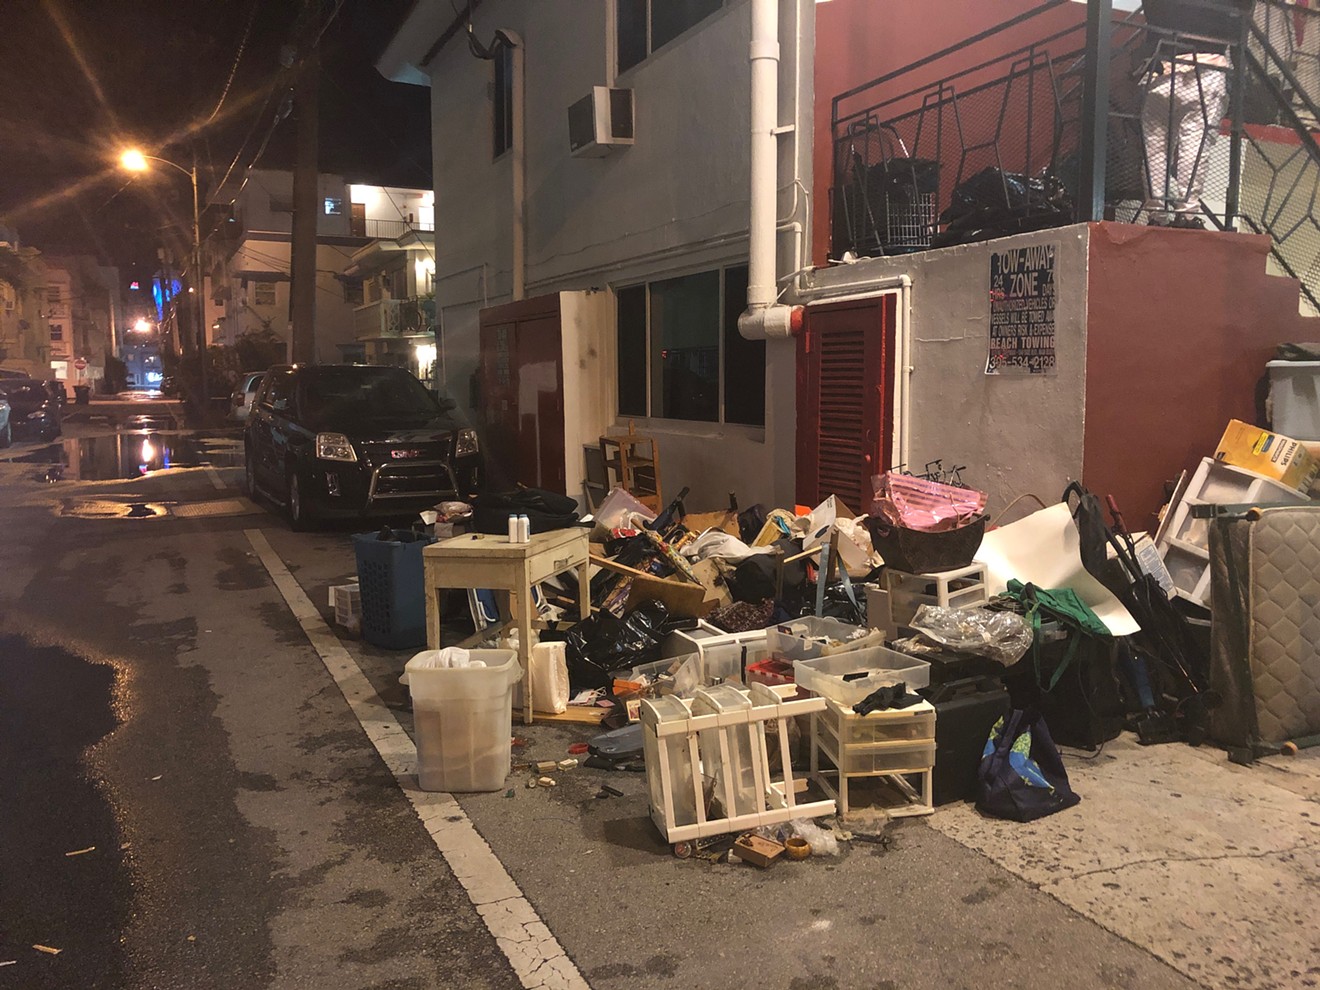 Maria Cazañes was evicted Friday night in South Beach. Her belongings were thrown into the alley behind her apartment on Euclid Avenue.